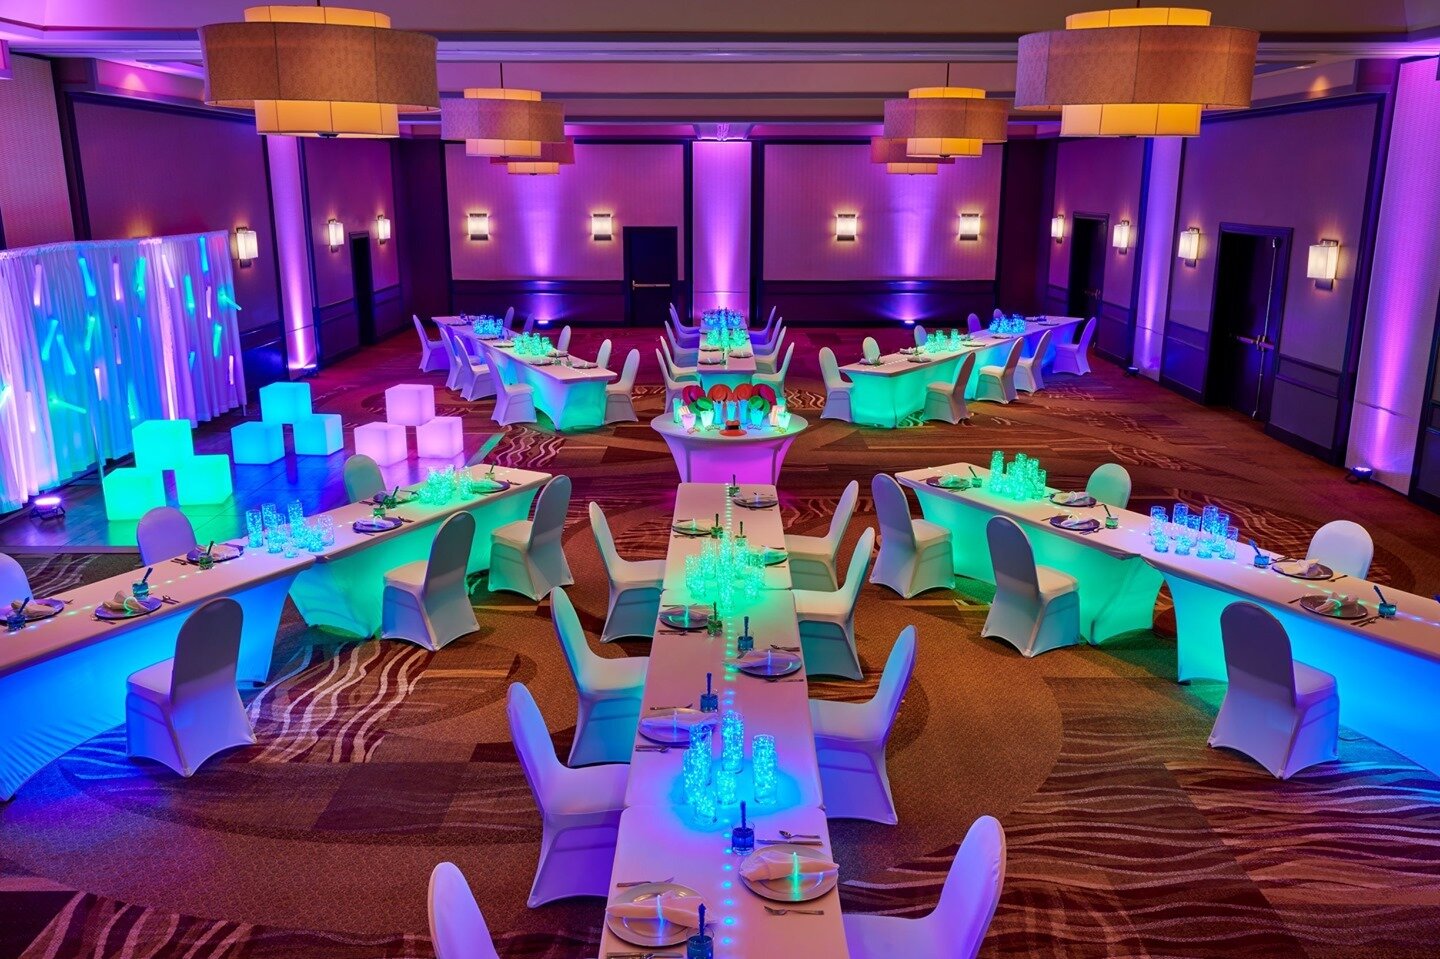 Mazel Tov! We have a beautiful space for your teens future mitzvah!  The North Shore Ballroom had this Glow Party Mitzvah pre-pandemic and we have been reminiscing about it ever since. Start planning with us today to make your teens Mitzvah Dreams co